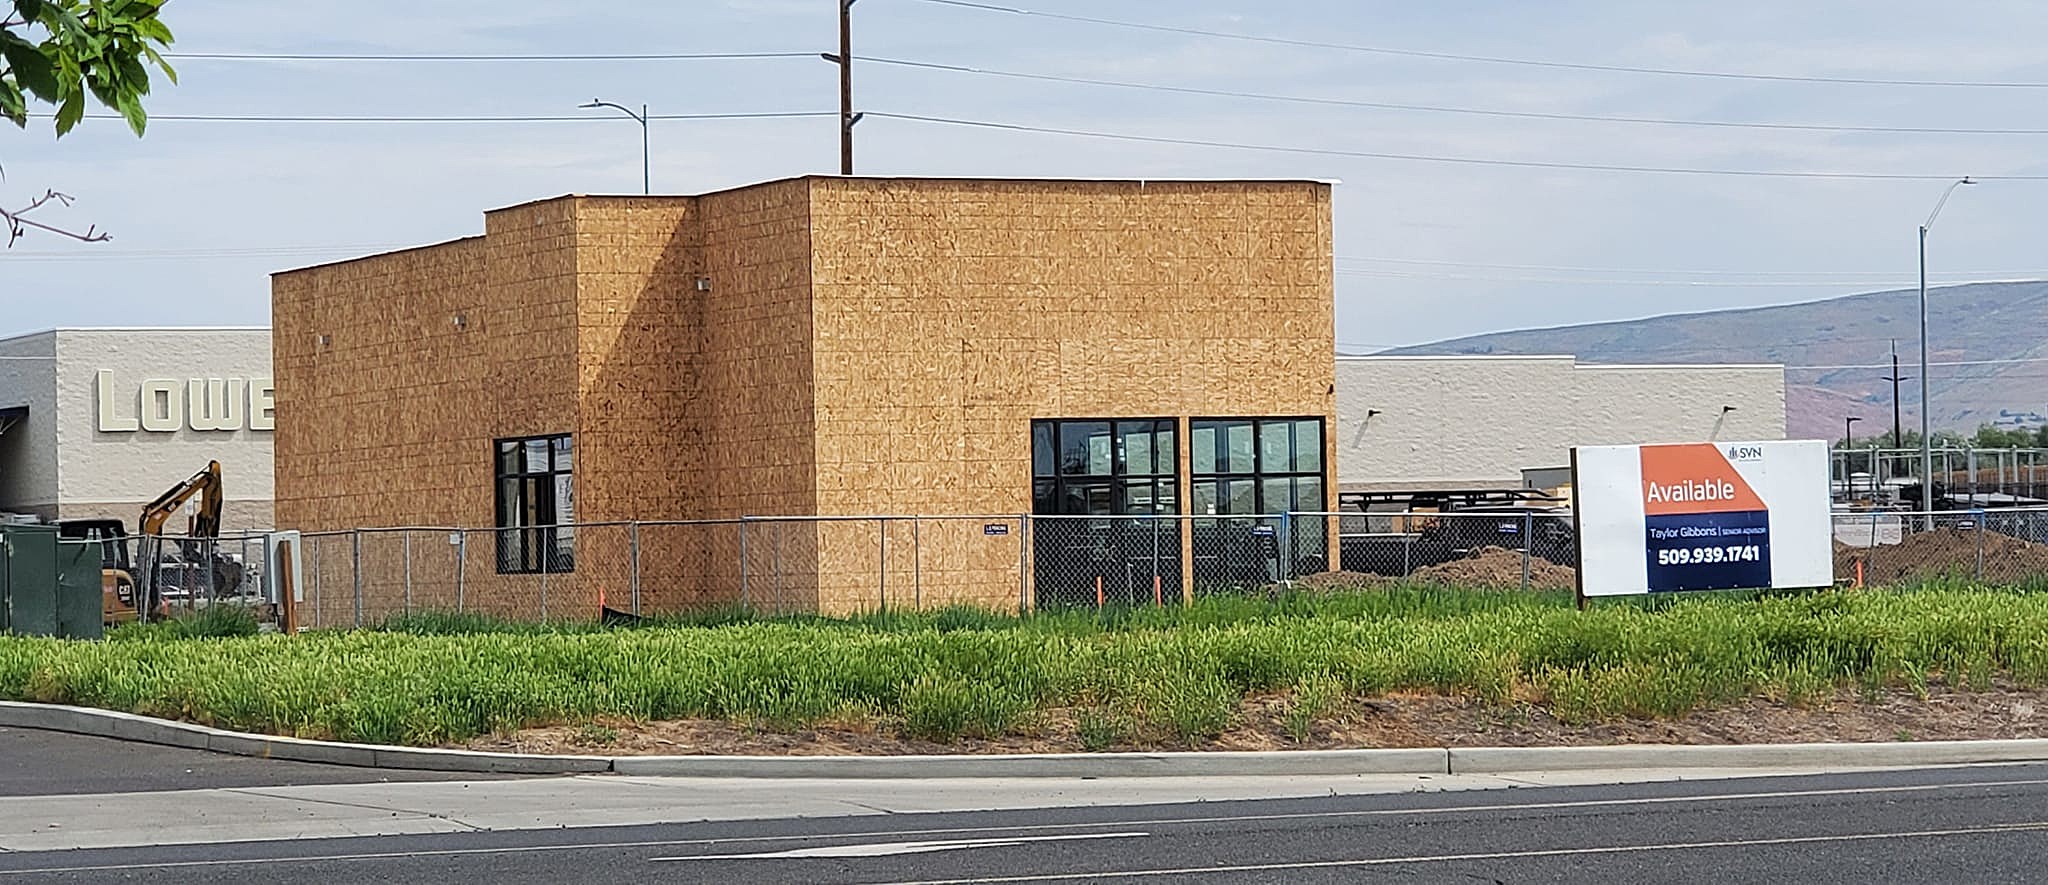 Are You Excited or Disappointed on Whats Being Built by Winco? picture